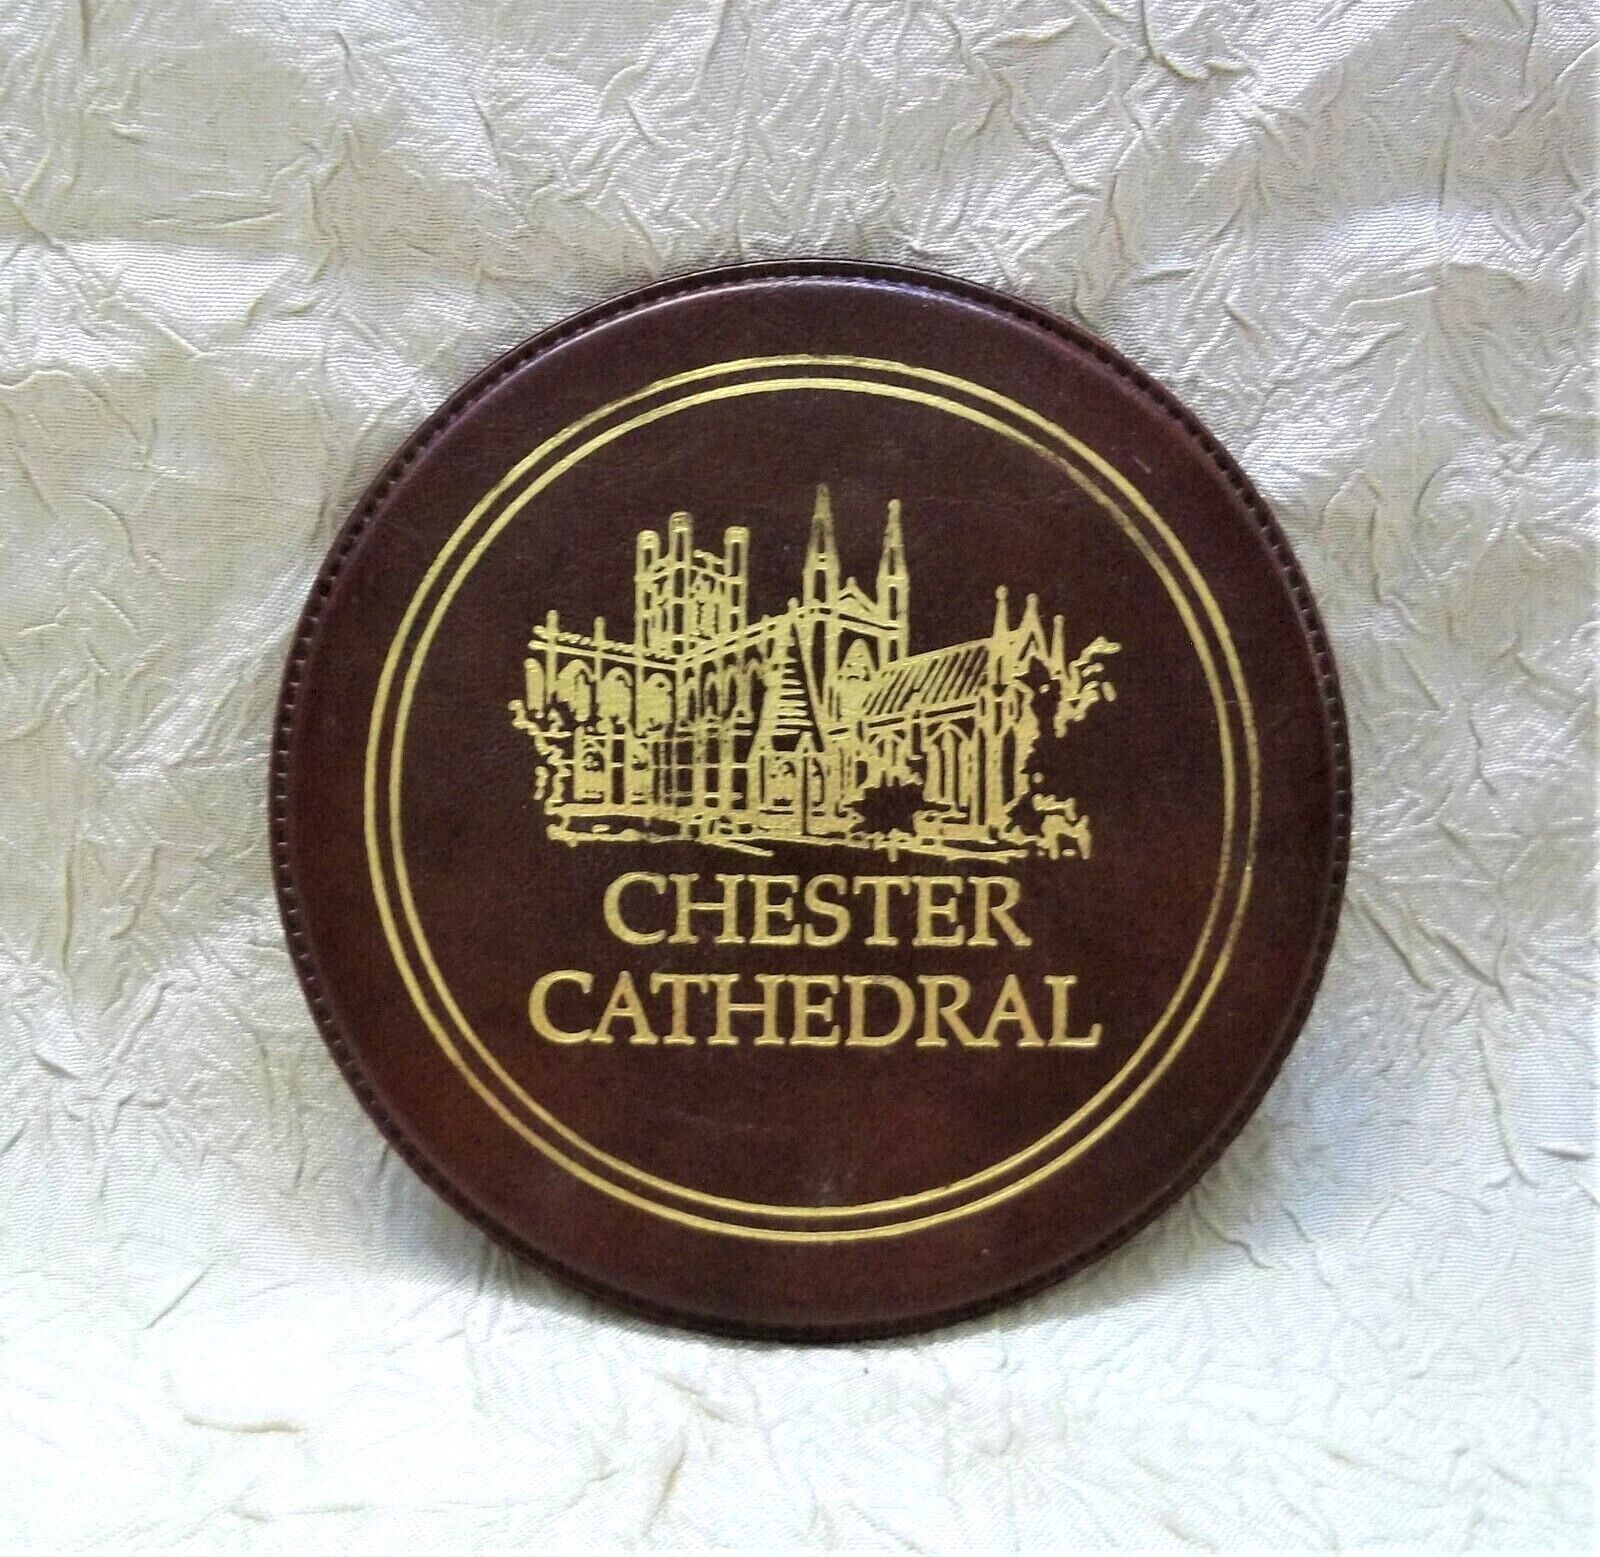 Chester Cathedral Souvenir Beverage Coaster Cheshire England New 